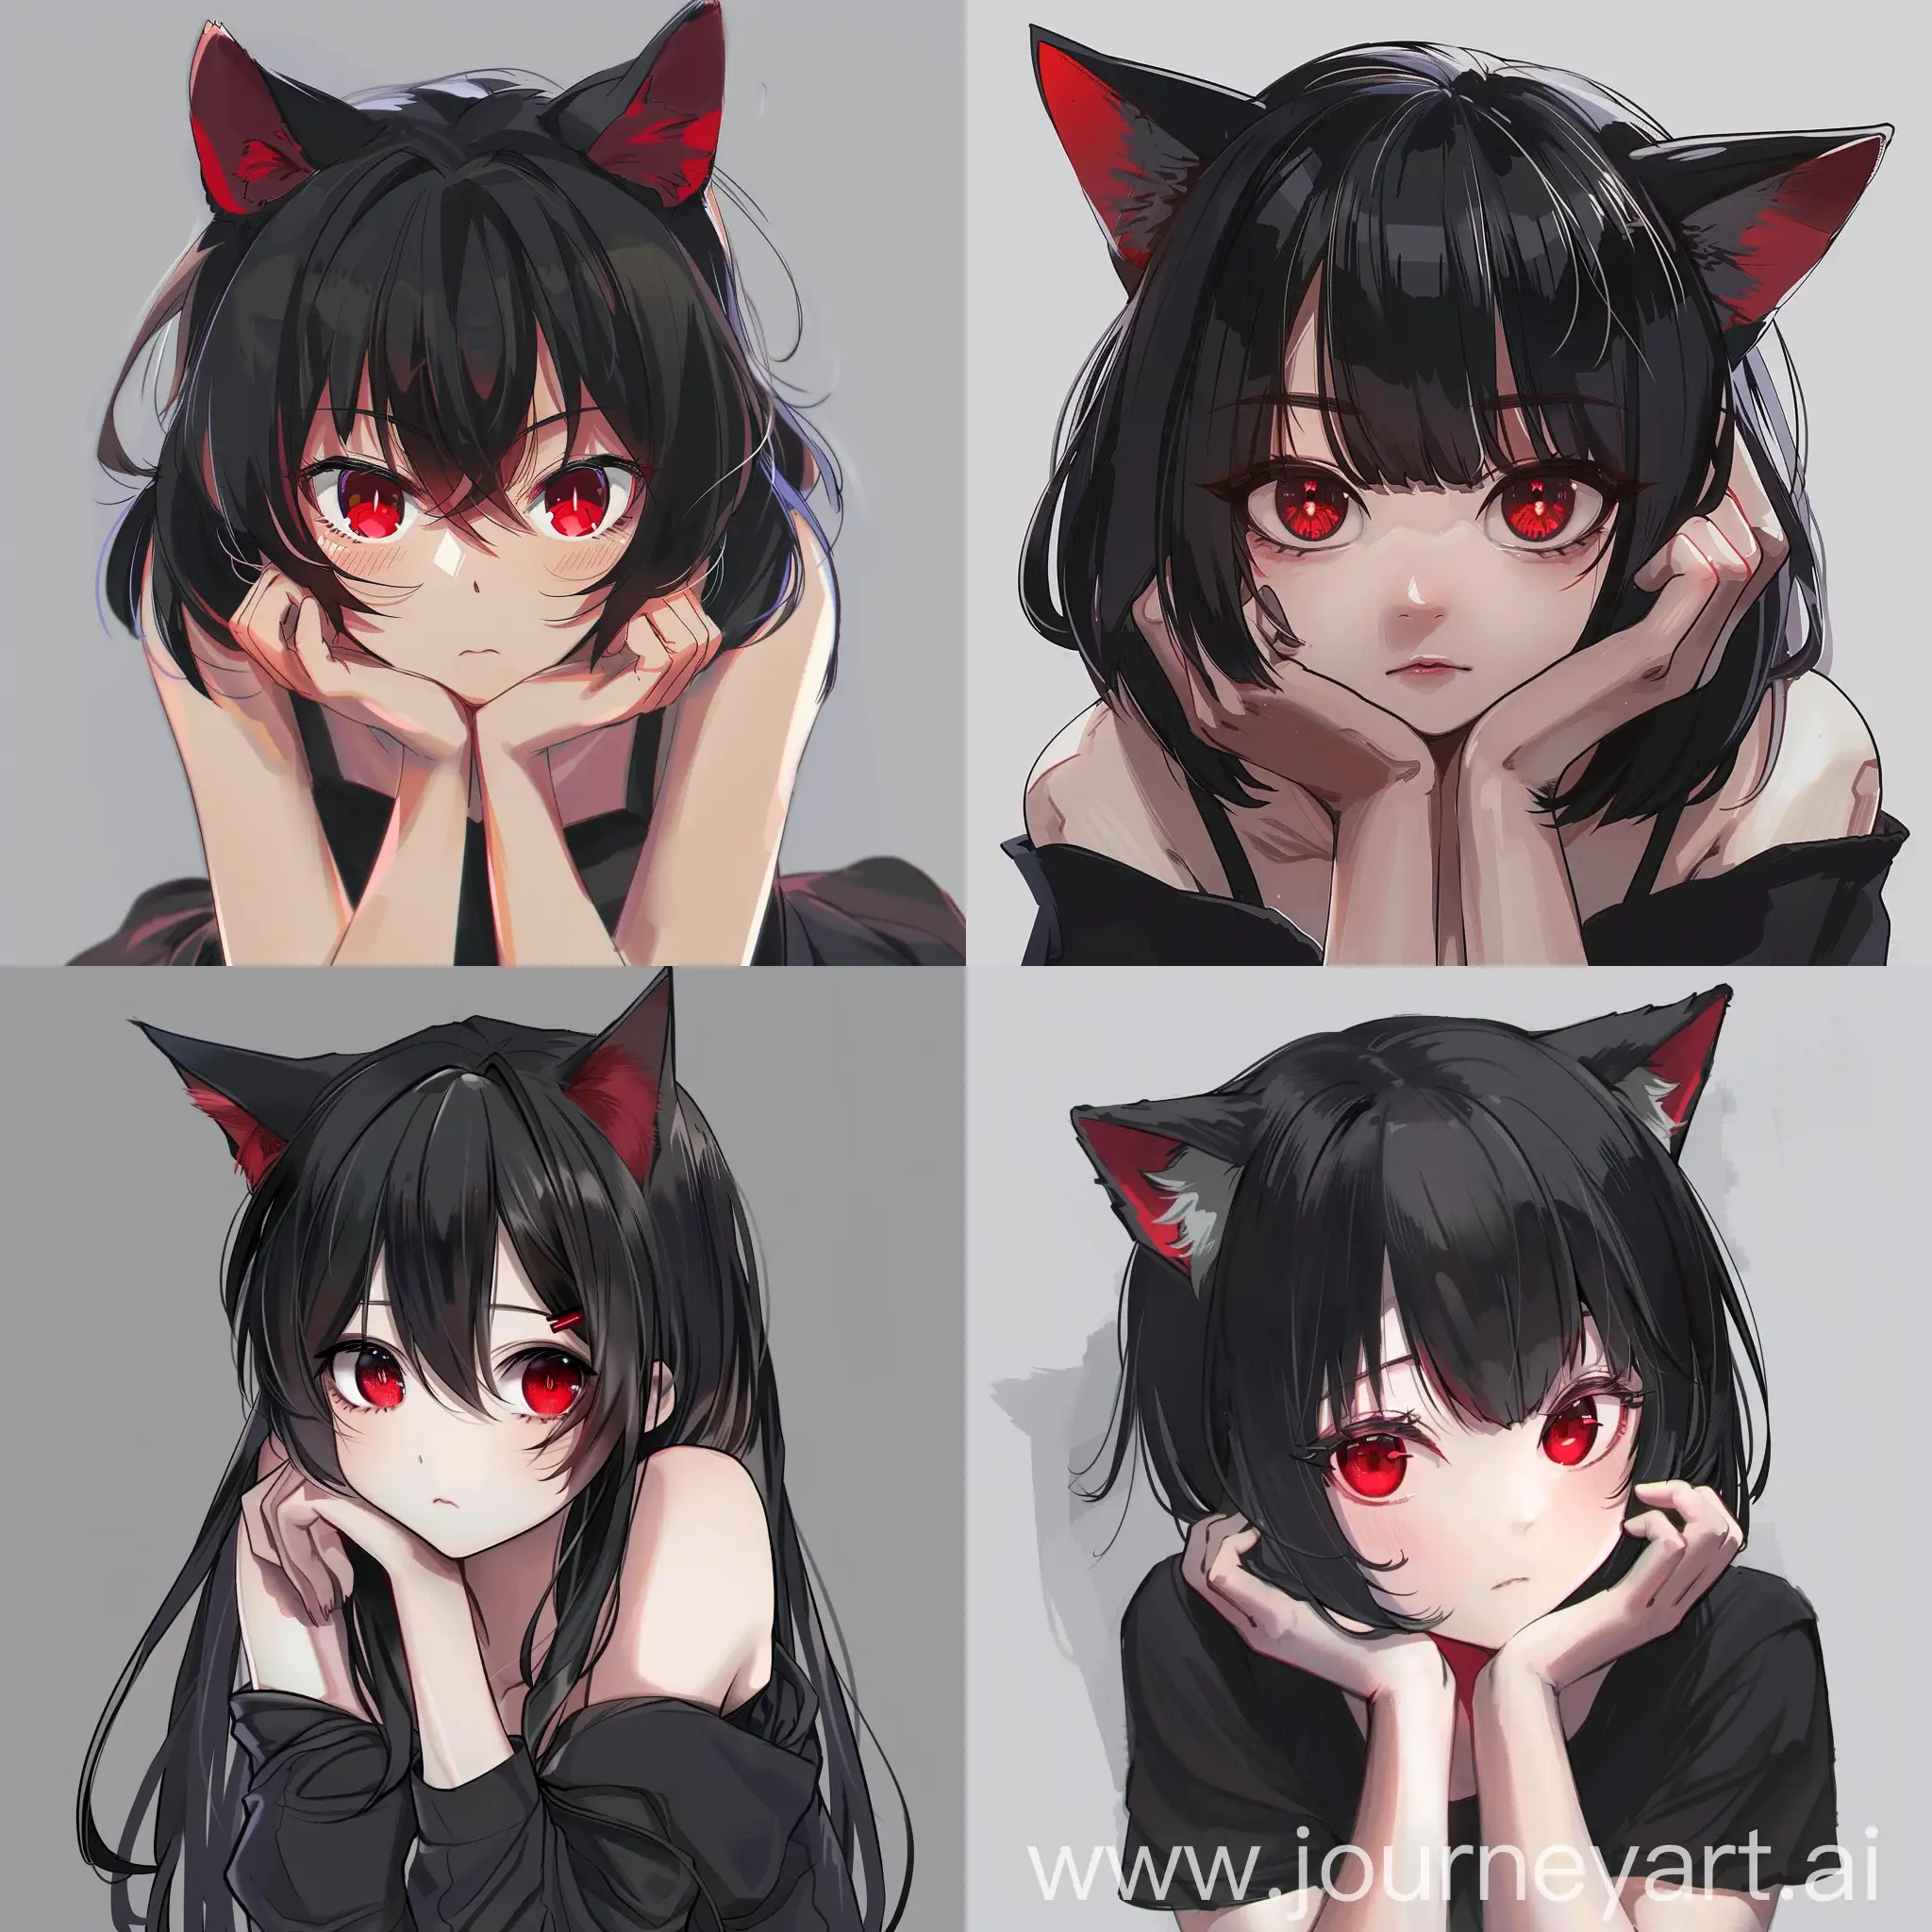 Anime-Girl-with-Pitch-Black-Hair-and-Floppy-Cat-Ears-Posing